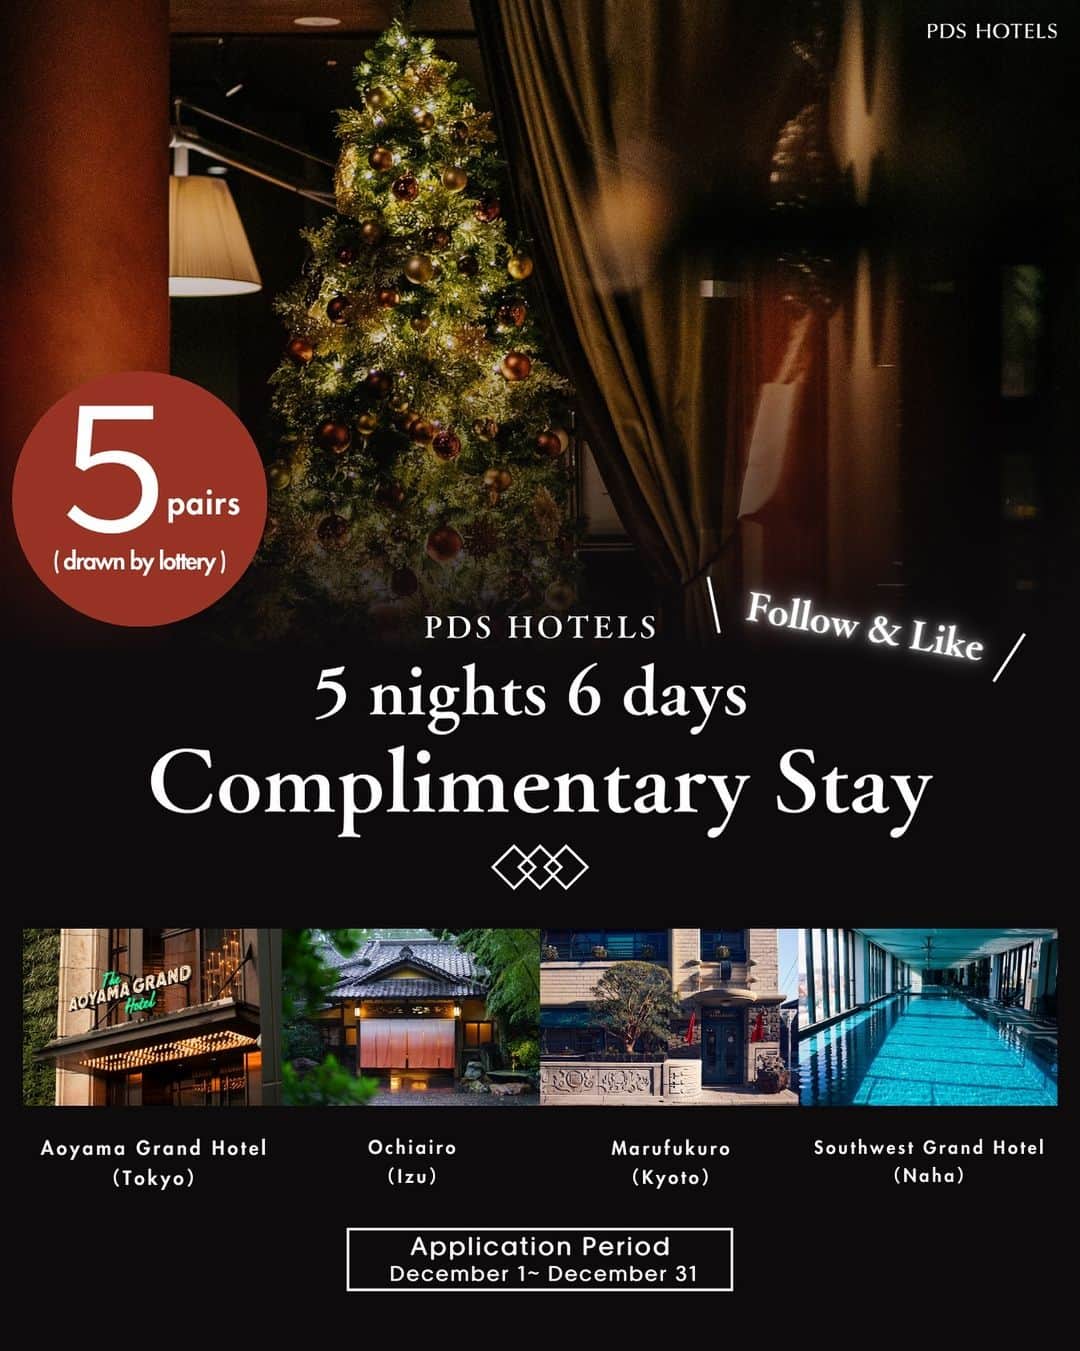 with the styleのインスタグラム：「【PDS HOTELS HOLIDAY GIFT】  Follow & Like to win a 5-night stay at a PDS HOTELS hotel in Japan! We are giving away free accommodations for 5 nights at 4 of the 7 boutique hotels at our hotel brand PDS HOTELS in Japan (worth up to 400,000 yen) to 5 groups (up to 10 people)!  Please check the details below, follow our official Instagram account (@pds_hotels) and "like" the campaign post on the brand account.  ◾️Giveaway details 5 nights complimentary stay to 5 groups (maximum 2 adults per group) ・THE AOYAMA GRAND HOTEL, TOKYO @aoyamagrand 　　1 night with breakfast ・Southwest Grand Hotel, OKIWANA @southwestgrandhotel 　　2 nights with breakfast ・Ochiairo, IZU @ochiairo 　　1 night with breakfast and dinner ・Marufukuro marufukuro 　　1 night with breakfast and dinner  ■Dates of accommodations  Those who won the gift can stay at any of the 4 hotels from February 1, 2024 to January 31, 2025 (some dates are not applicable, please check with the hotels when making your reservation). Please note that the hotels will specify the room type according to the availability. *Please pay for your own transportation to the hotels.  ◾️Deadline: December 31, 2023 (Sun.) 23:59  ◾️How to apply ①Follow the hotel brand account (@pds_hotels) ②”Like" the campaign post in the brand account (@pds_hotels) ✨Share the post on your own Stories to increase your chances of winning! ✨  ■Terms and conditions ・ You must be 18 years of age or older ・No restrictions on country or place of residence.  ◾️Announcement of winners We will choose the winners after January 8th, 2024 (Monday), and the winner will be notified by the DM from the brand account by mid January.」